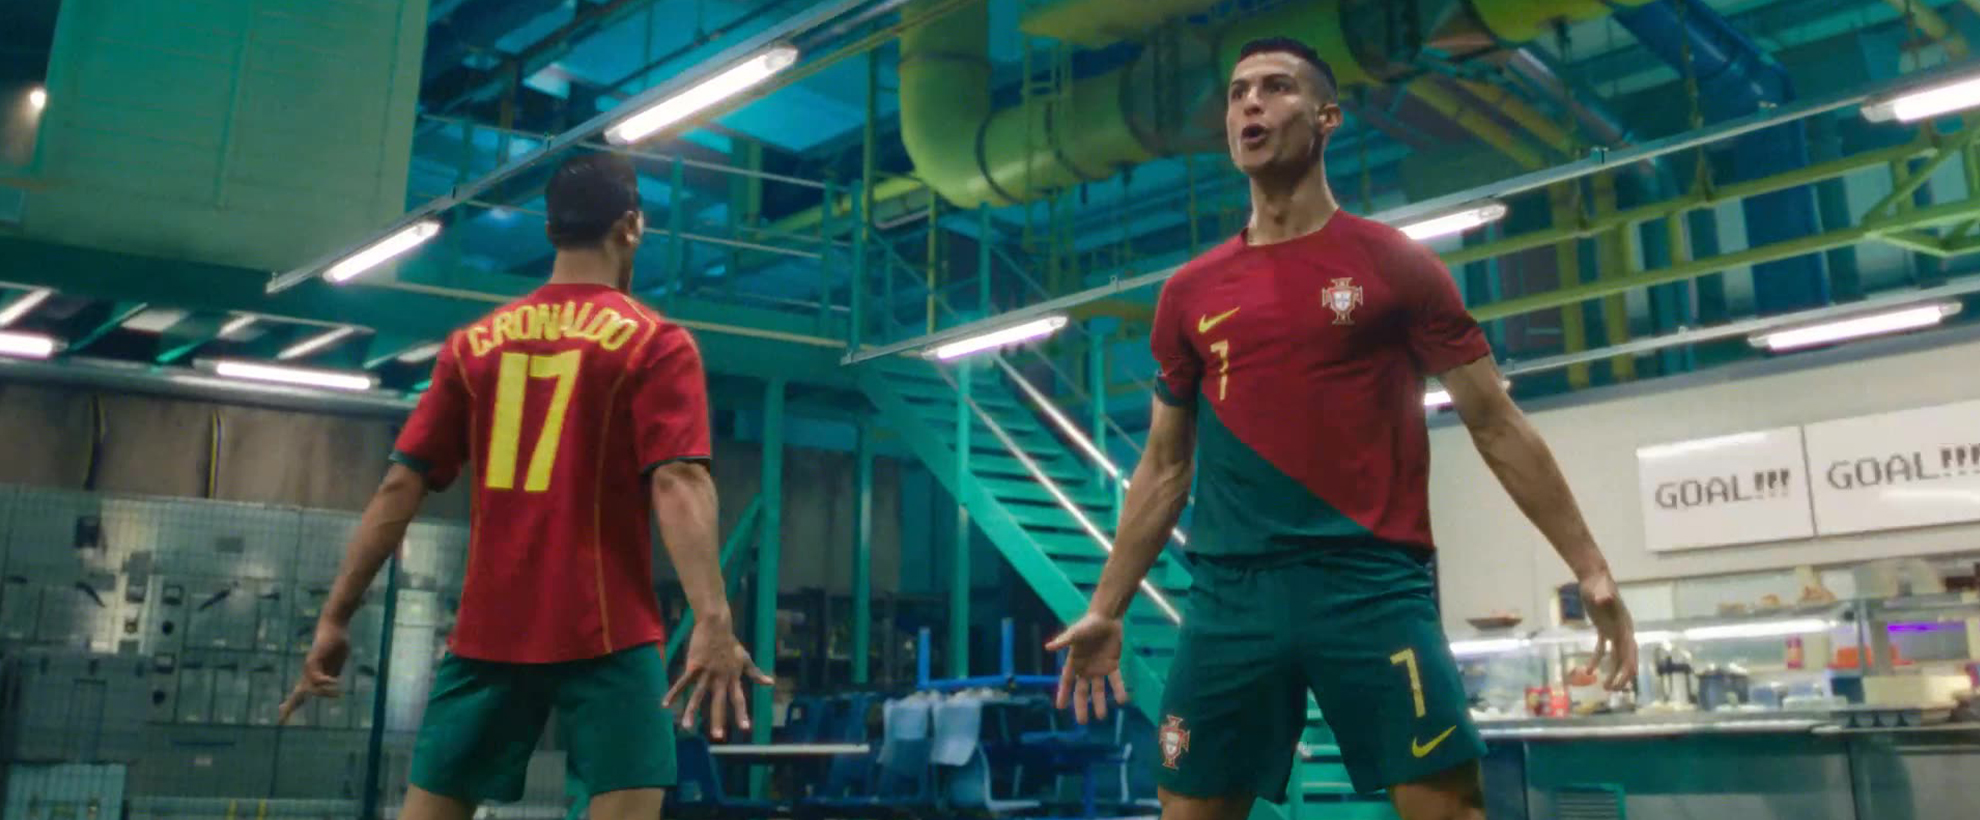 Two football players face each other in a warehouse setting, celebrating a goal